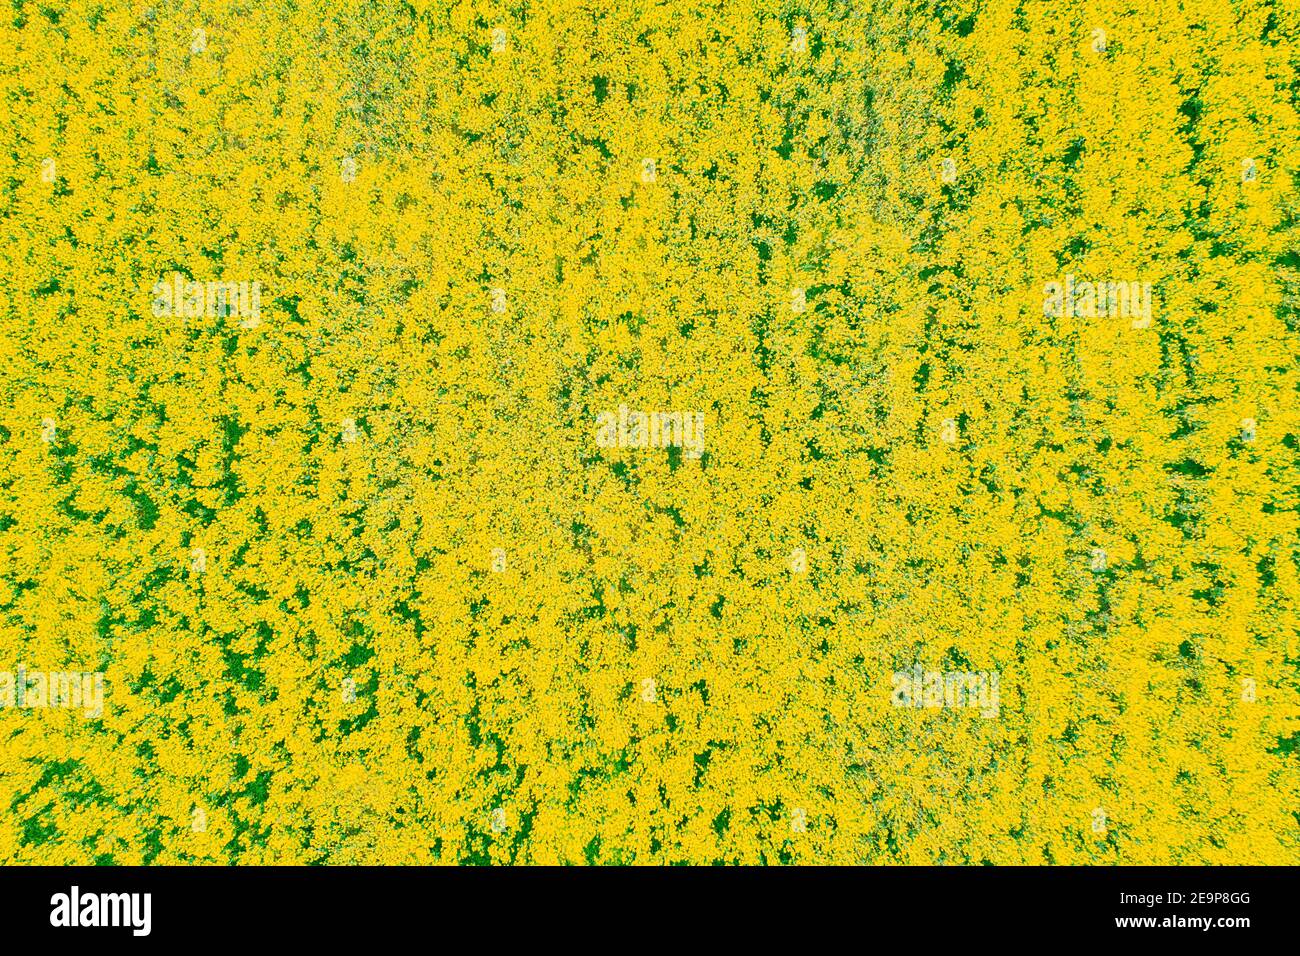 Aerial View. Agricultural Landscape With Flowering Blooming Rapeseed, Oilseed In Field Meadow In Spring Season. Blossom Of Canola Yellow Flowers Stock Photo